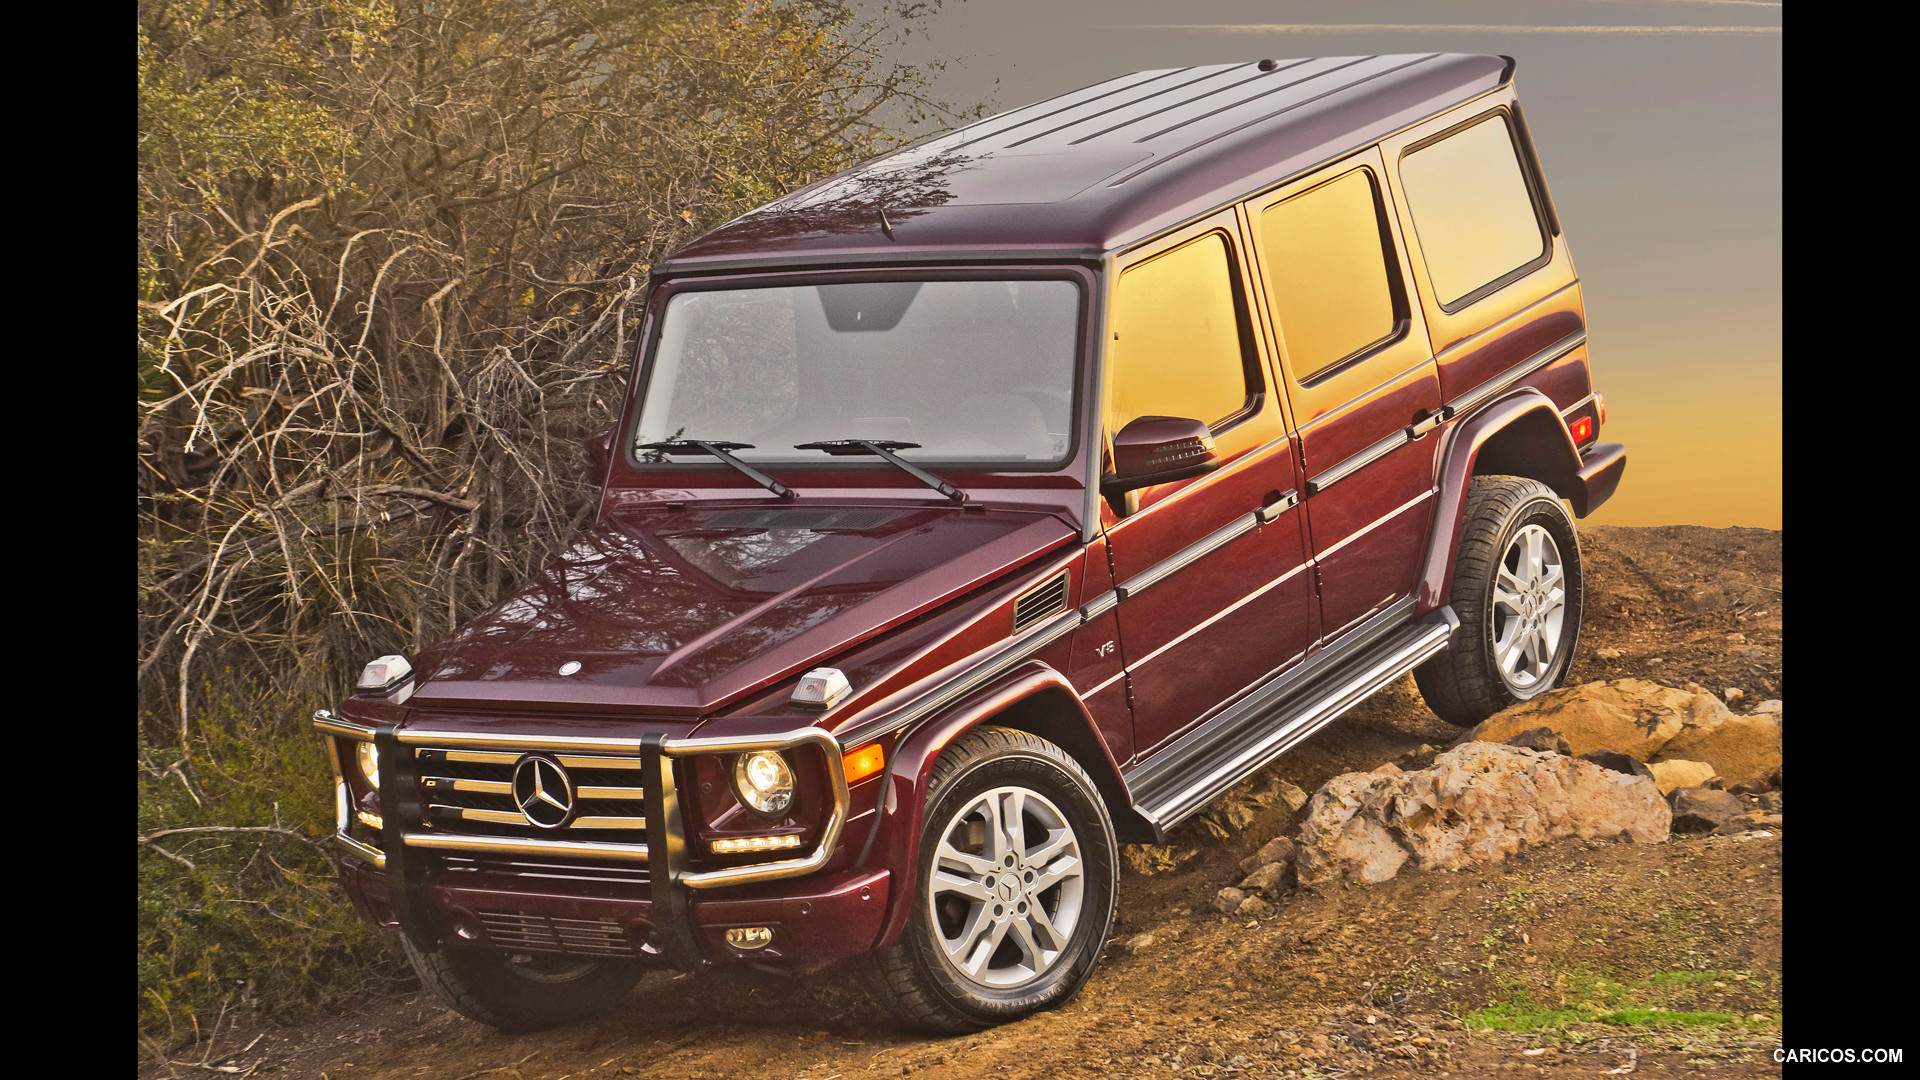 2013 Mercedes-Benz G550 Off-Road - Front, #53 of 73